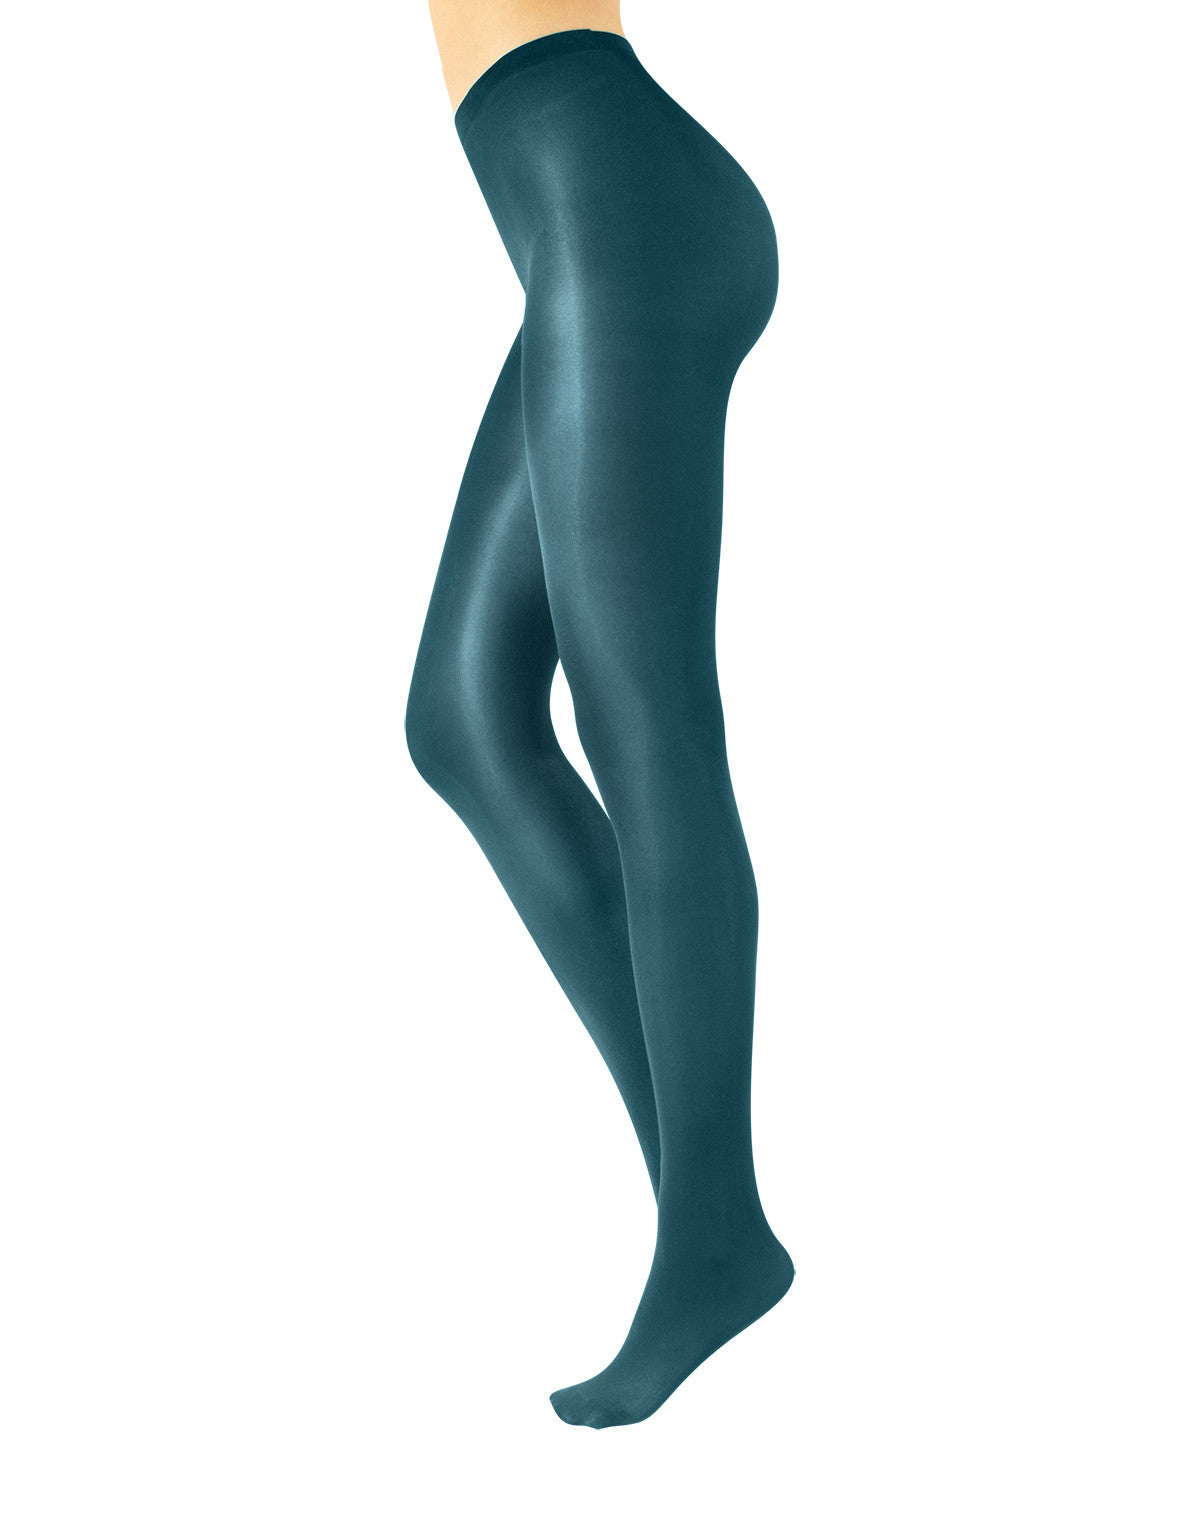 Calzitaly Glossy Tights - Teal green ultra opaque tights with a shiny satin finish.